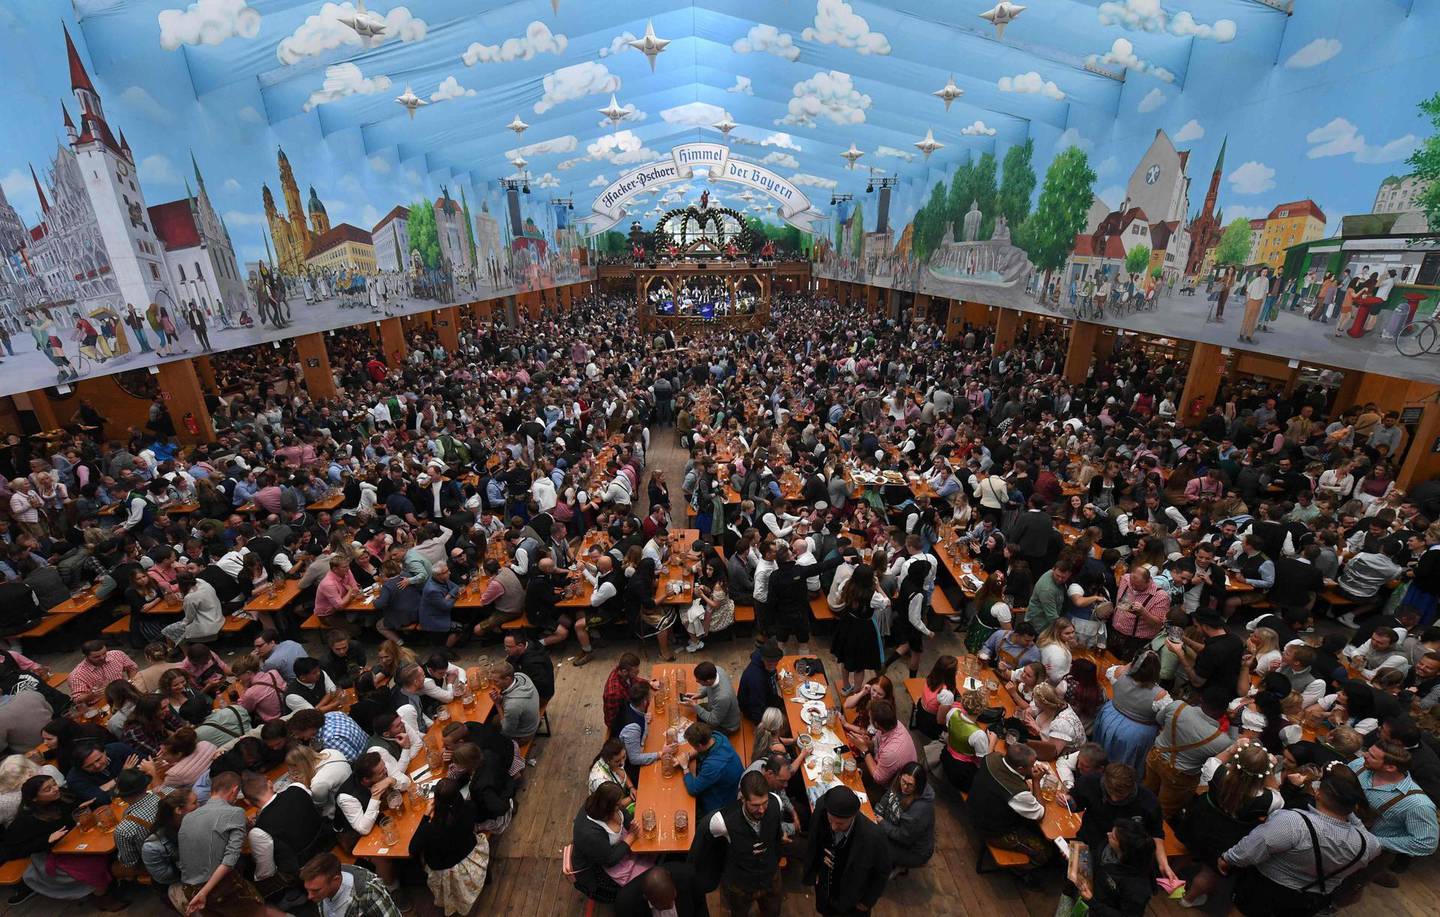 (FILES) This file photo taken on October 3, 2019 shows people crowding in a beer tent of the Oktoberfest beer festival in Munich, southern Germany.  Germany's Oktoberfest beer festival will be cancelled in the year 2020 as "risks are too high" from the novel coronavirus, Bavarian state premier Markus Soeder said Tuesday, April 21, 2020. / AFP / Christof STACHE
